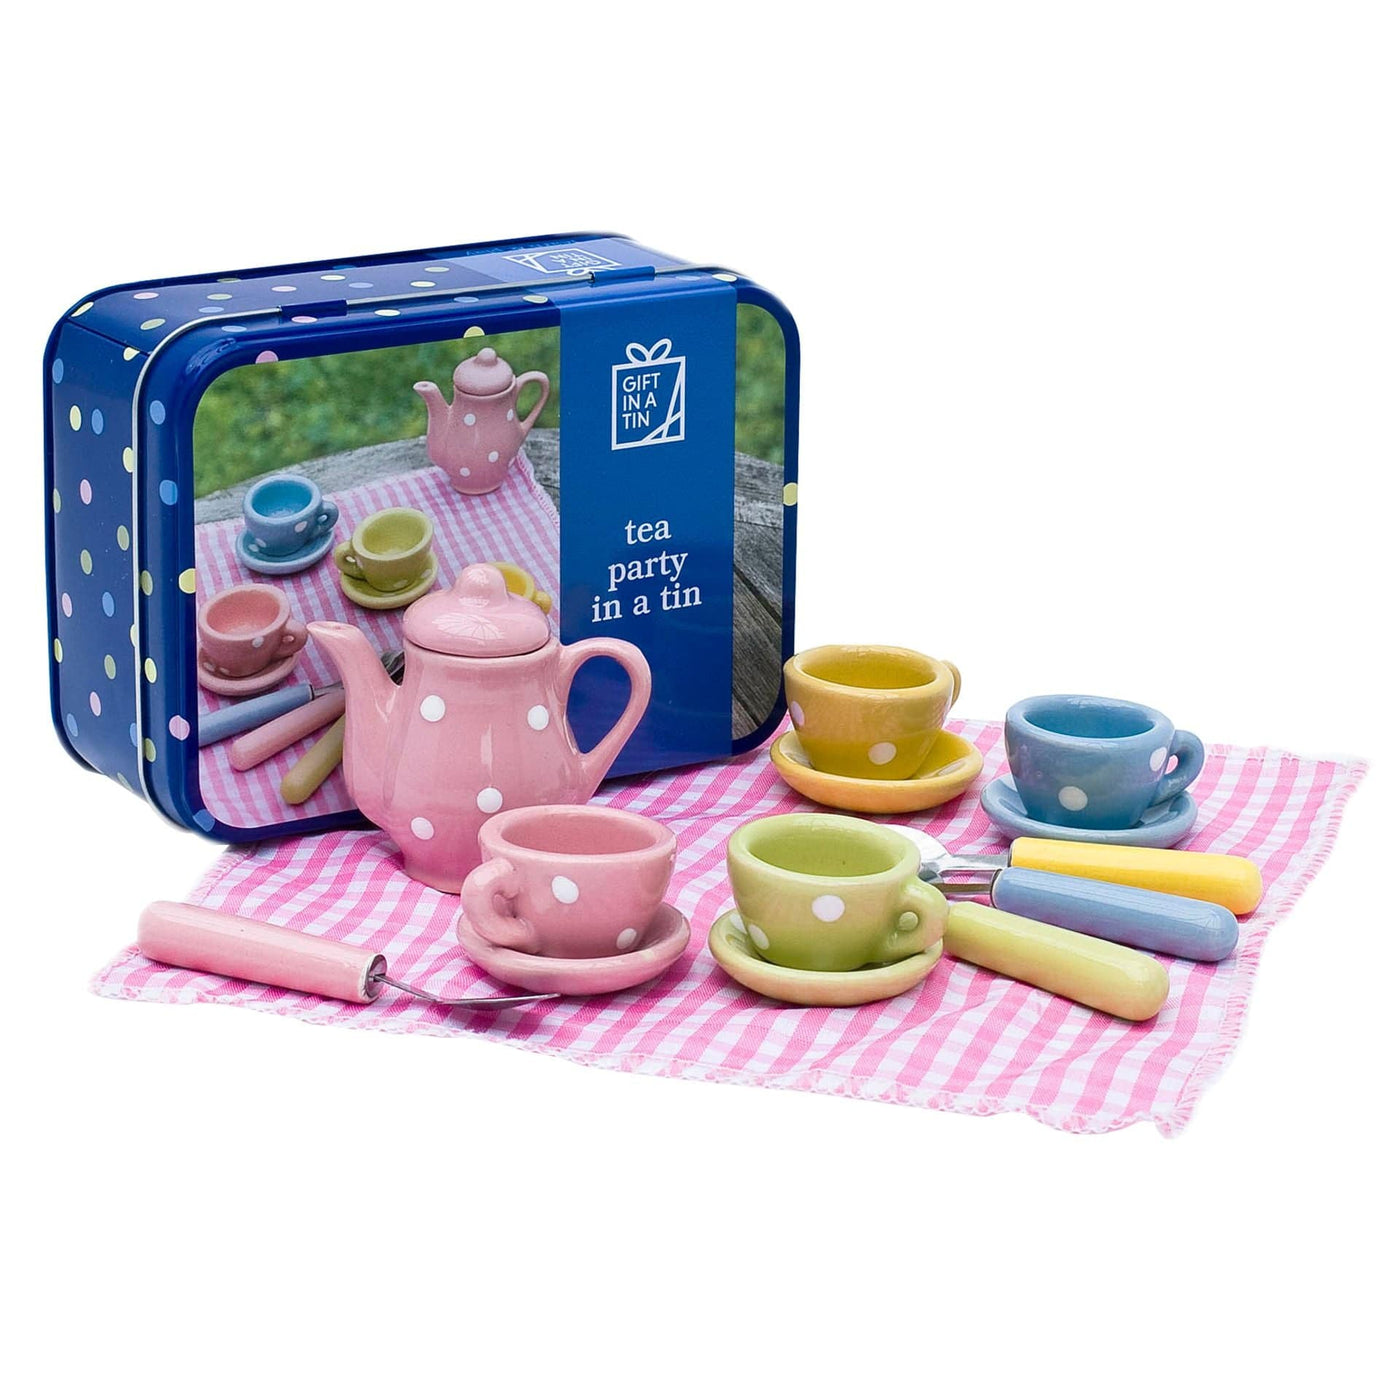 Widdop Gifts Novelty Gifts Miniature Tea Party in a Tin Gift